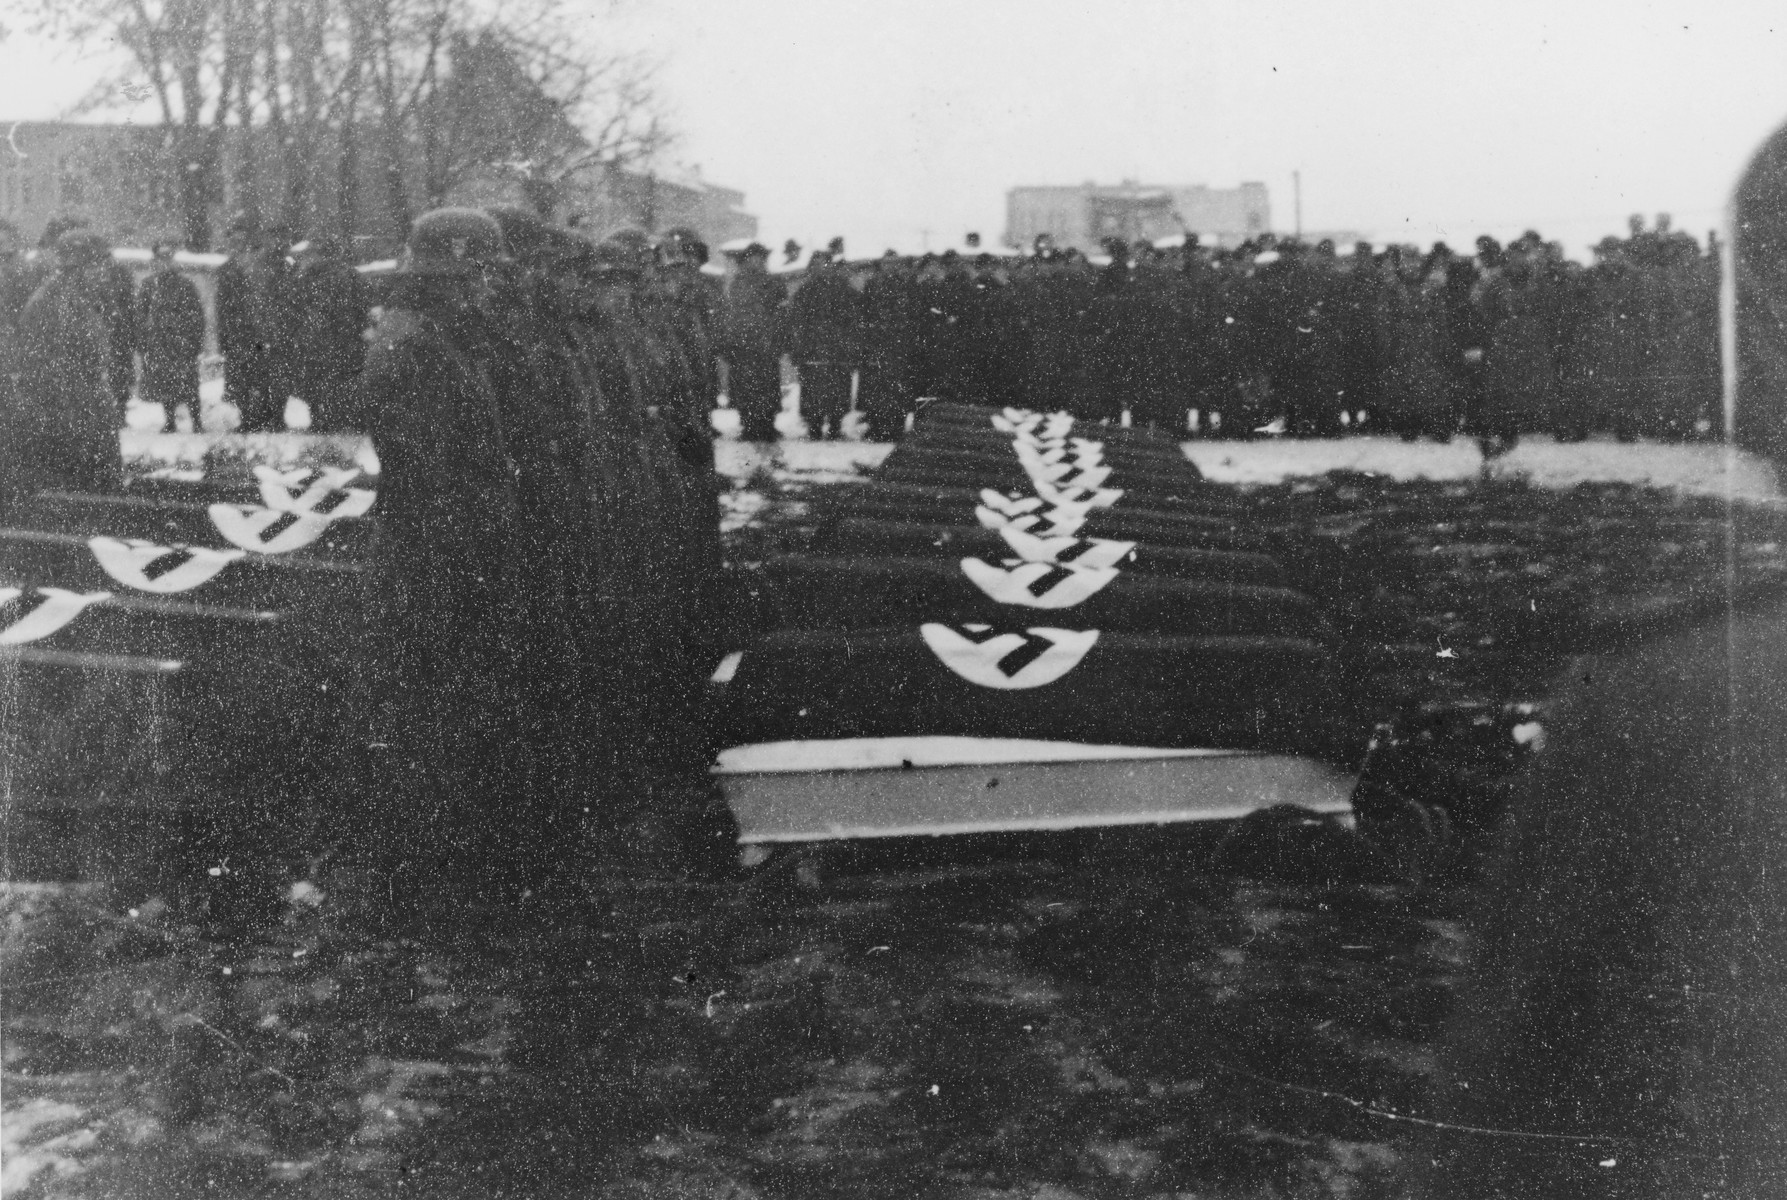 German troops stand at attention alongside a row of coffins during a military funeral near Auschwitz.

The original caption reads "Beisetzung von SS Kameraden nach einem Terrorangriff."  (Burying our SS comrades from a terror attack.)

[This probably is the aftermath of the December 26 bombing based on the snow on the ground but it could also be September 13th bombing of IG Farben in which 15 SS men died in the SS residential blocks and 28 were seriously wounded.]